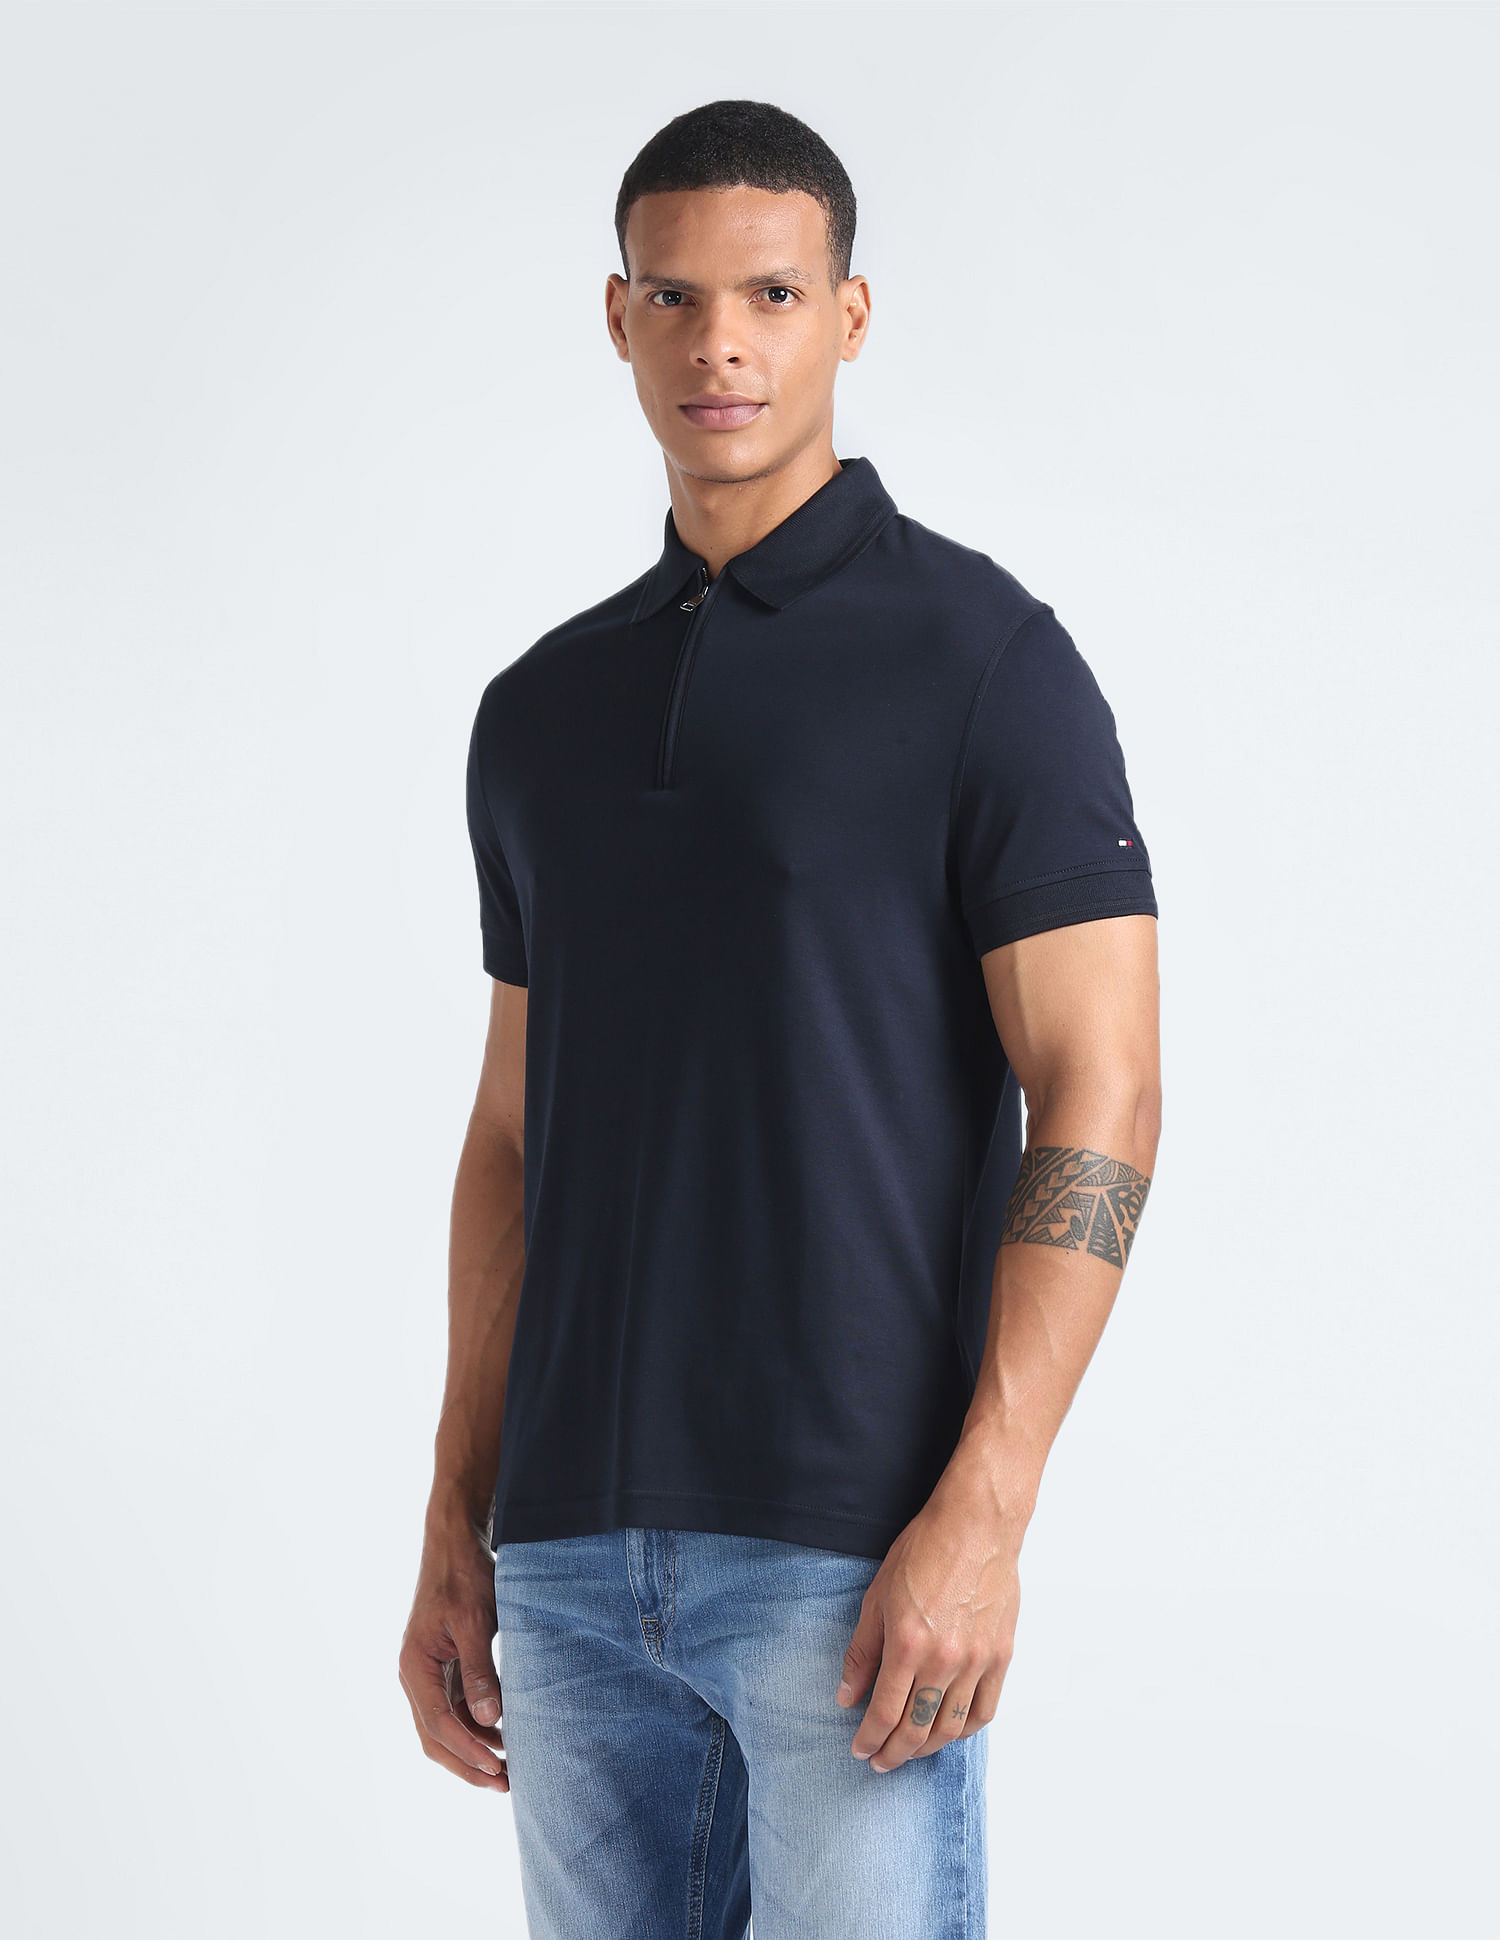 Tommy Hilfiger Tipped Slim Fit Polo T Shirt Navy